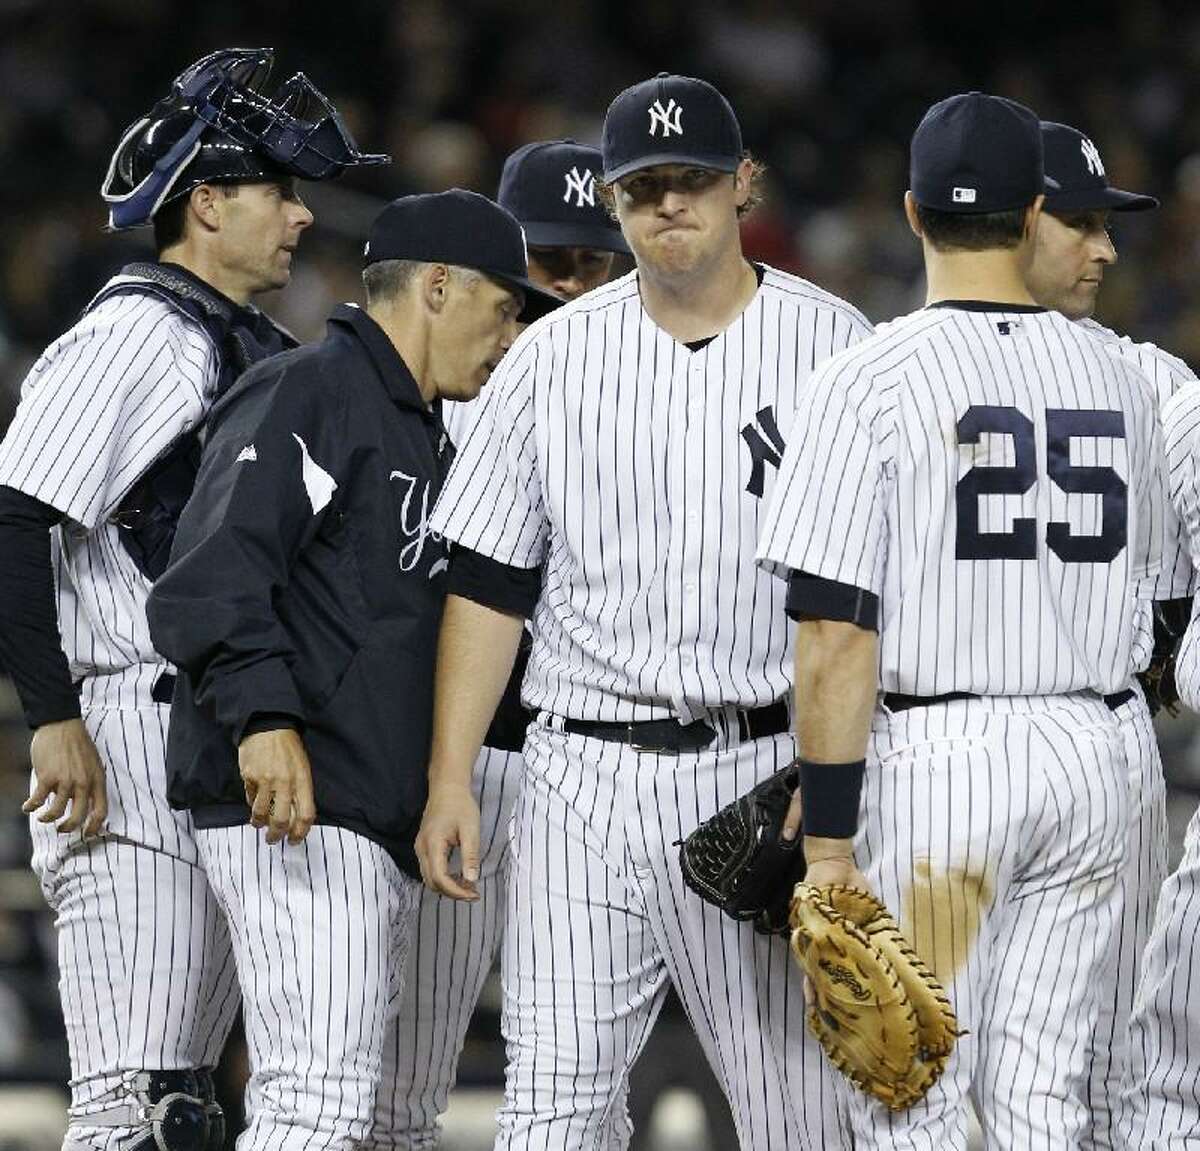 ASSOCIATED PRESS New York Yankees starting pitcher Phil Hughes, center, reacts as he leaves the mound in the sixth inning after manager Joe Girardi, second from left, took Hughes out during the Yankees' 7-1 loss to the Baltimore Orioles on Tuesday night at Yankee Stadium in New York. Yankees catcher Chris Stewart, left, third baseman Alex Rodriguez, first baseman Mark Teixeira (25) and shortstop Derek Jeter joined Hughes on the mound.